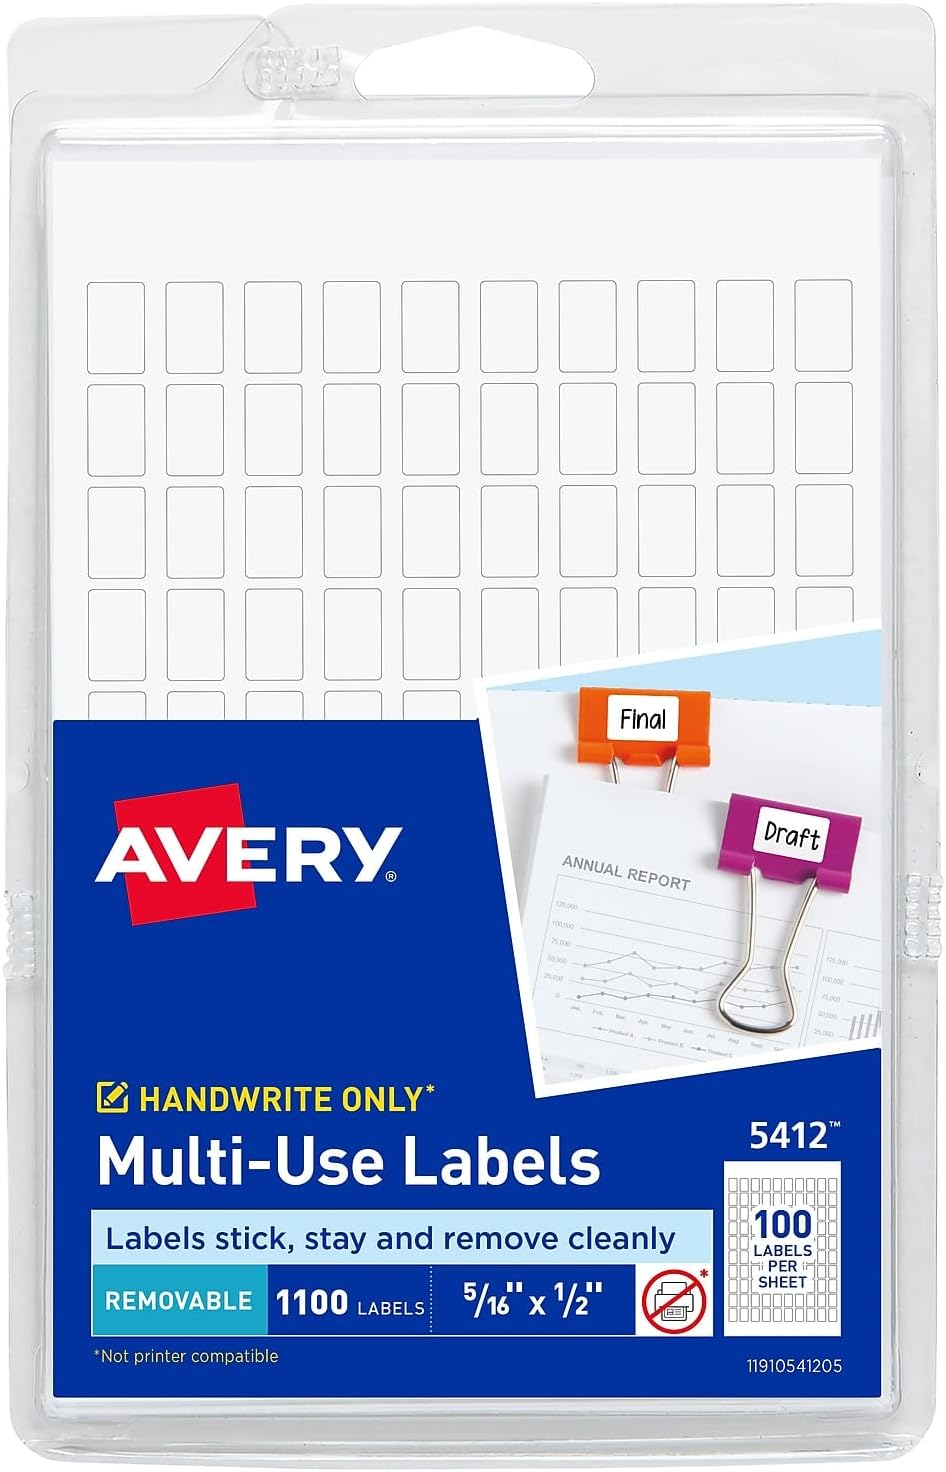 Avery 05412 Removable Multi-Use Labels, 5/16-Inch X 1/2-Inch, White, 1000 Labels/Pack